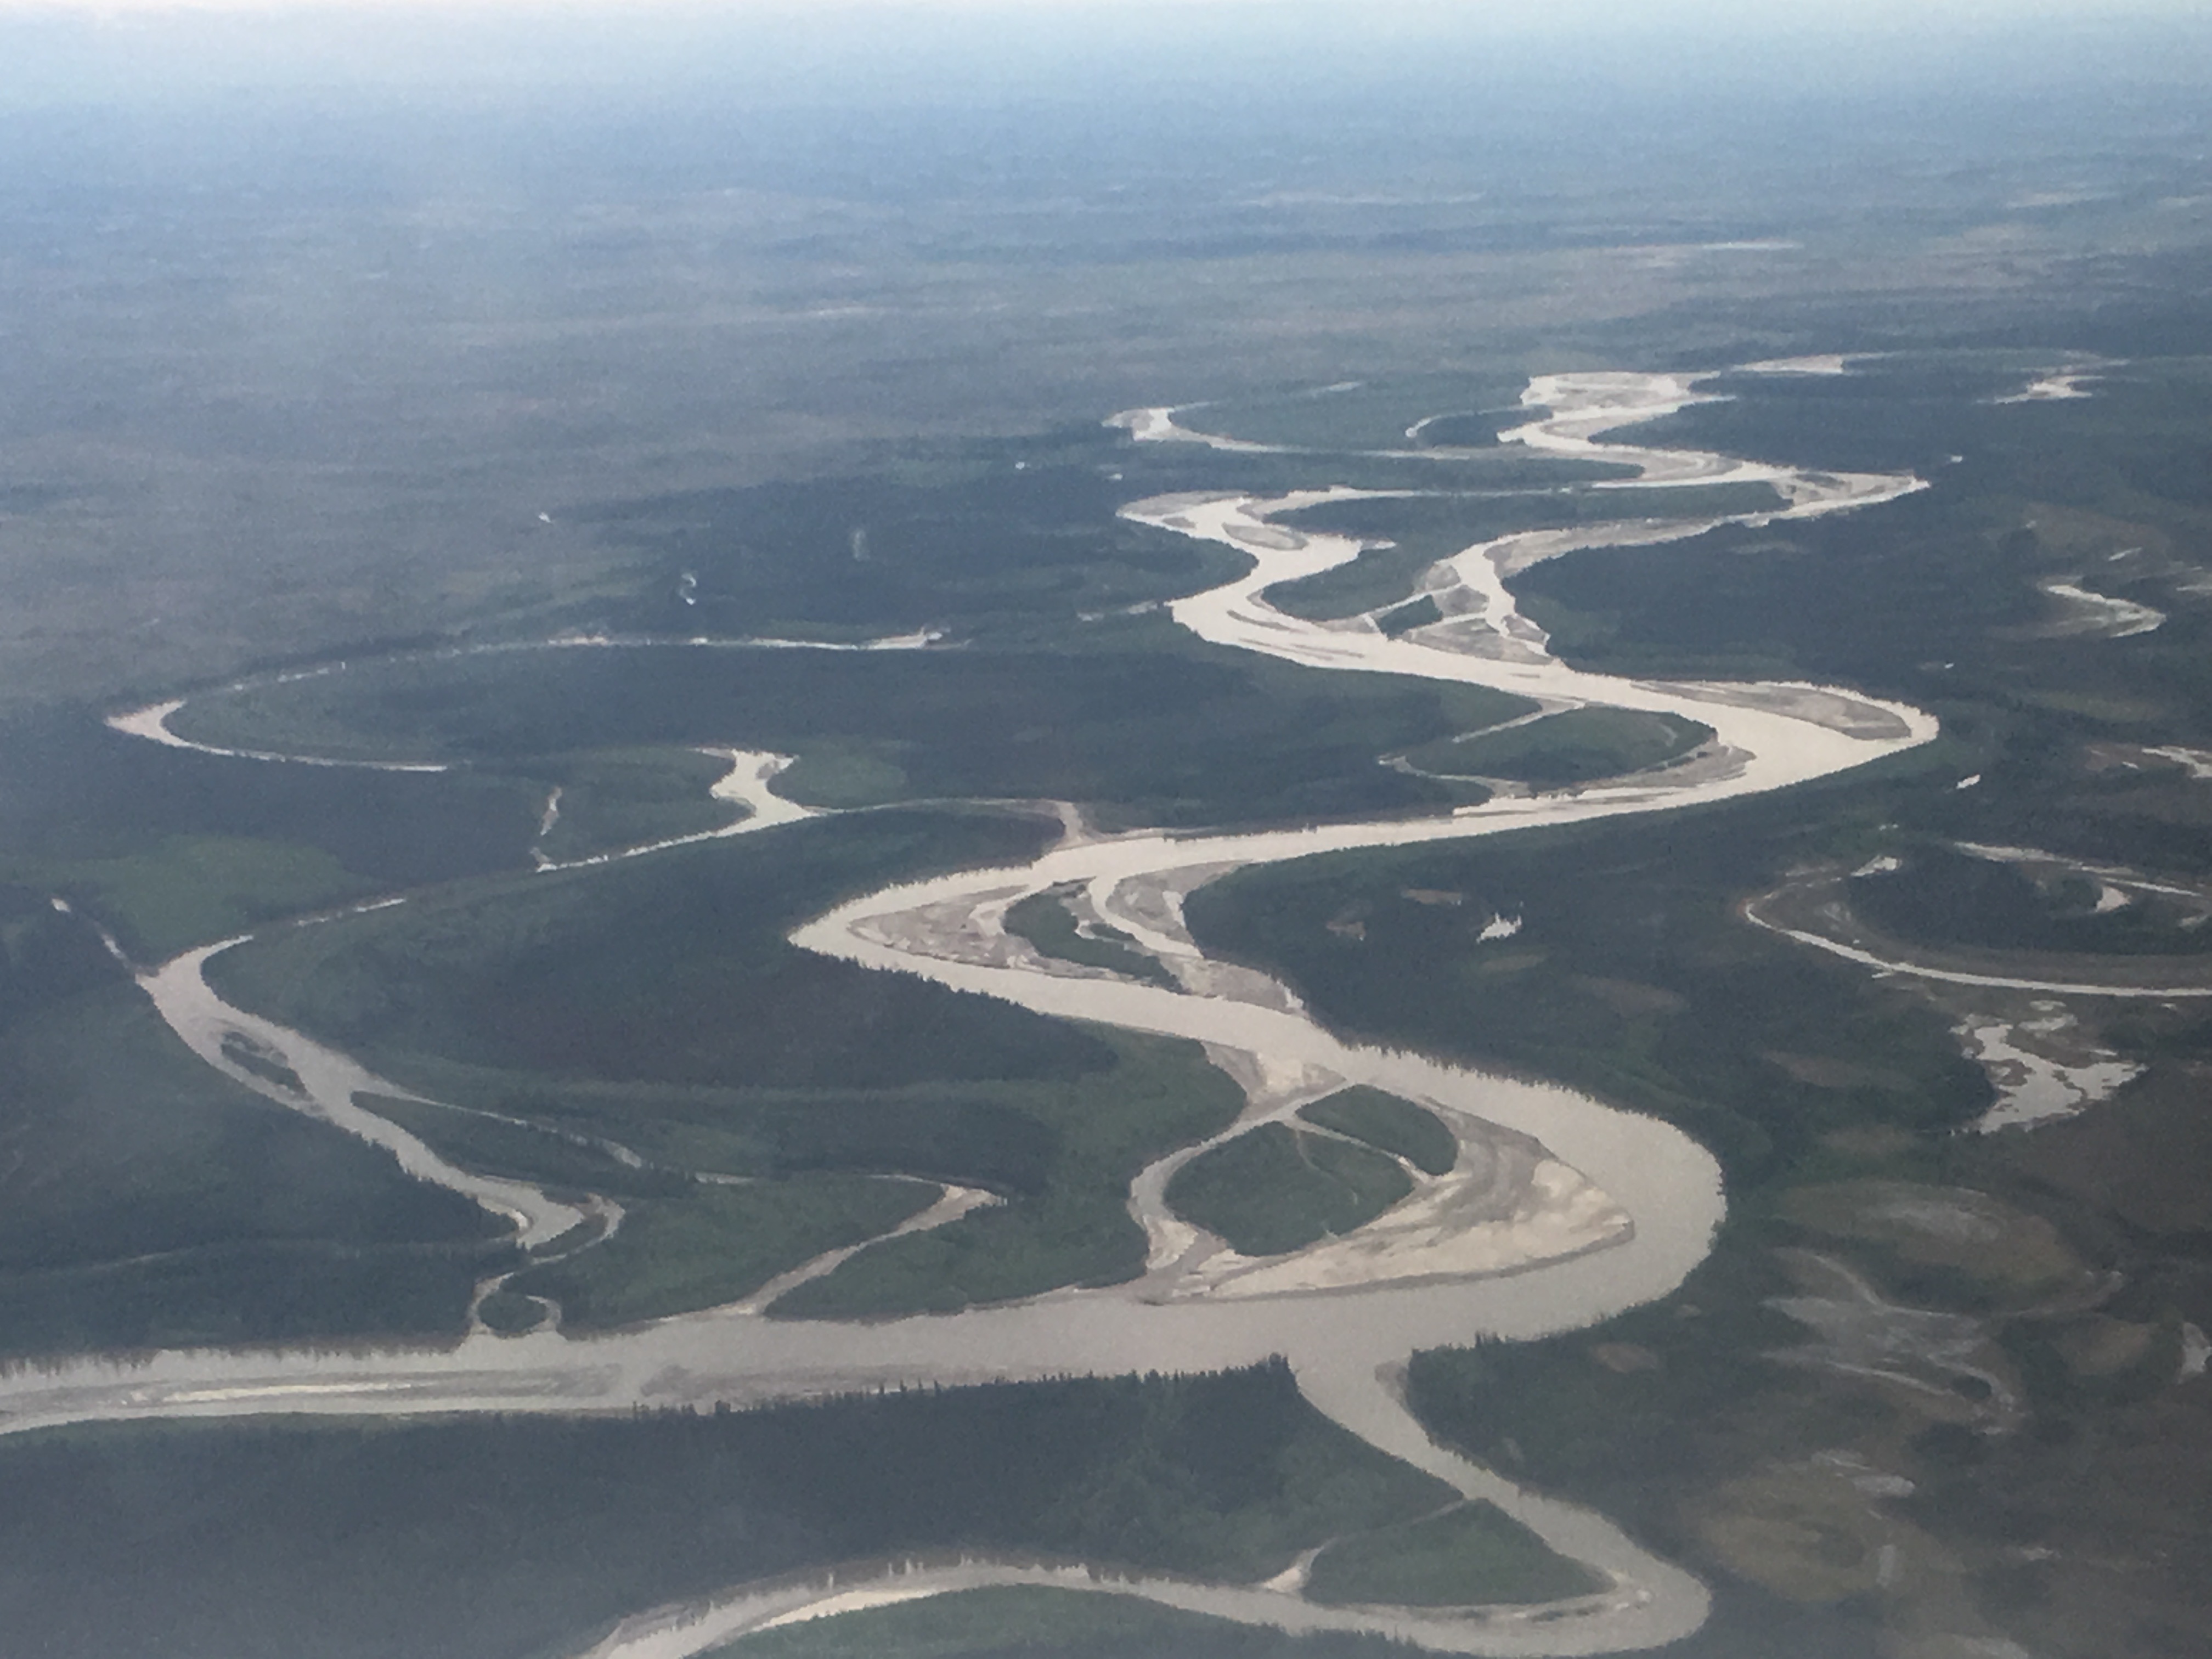 Alaska's Tanana River as seen from one of the ABoVE campaign's NASA planes